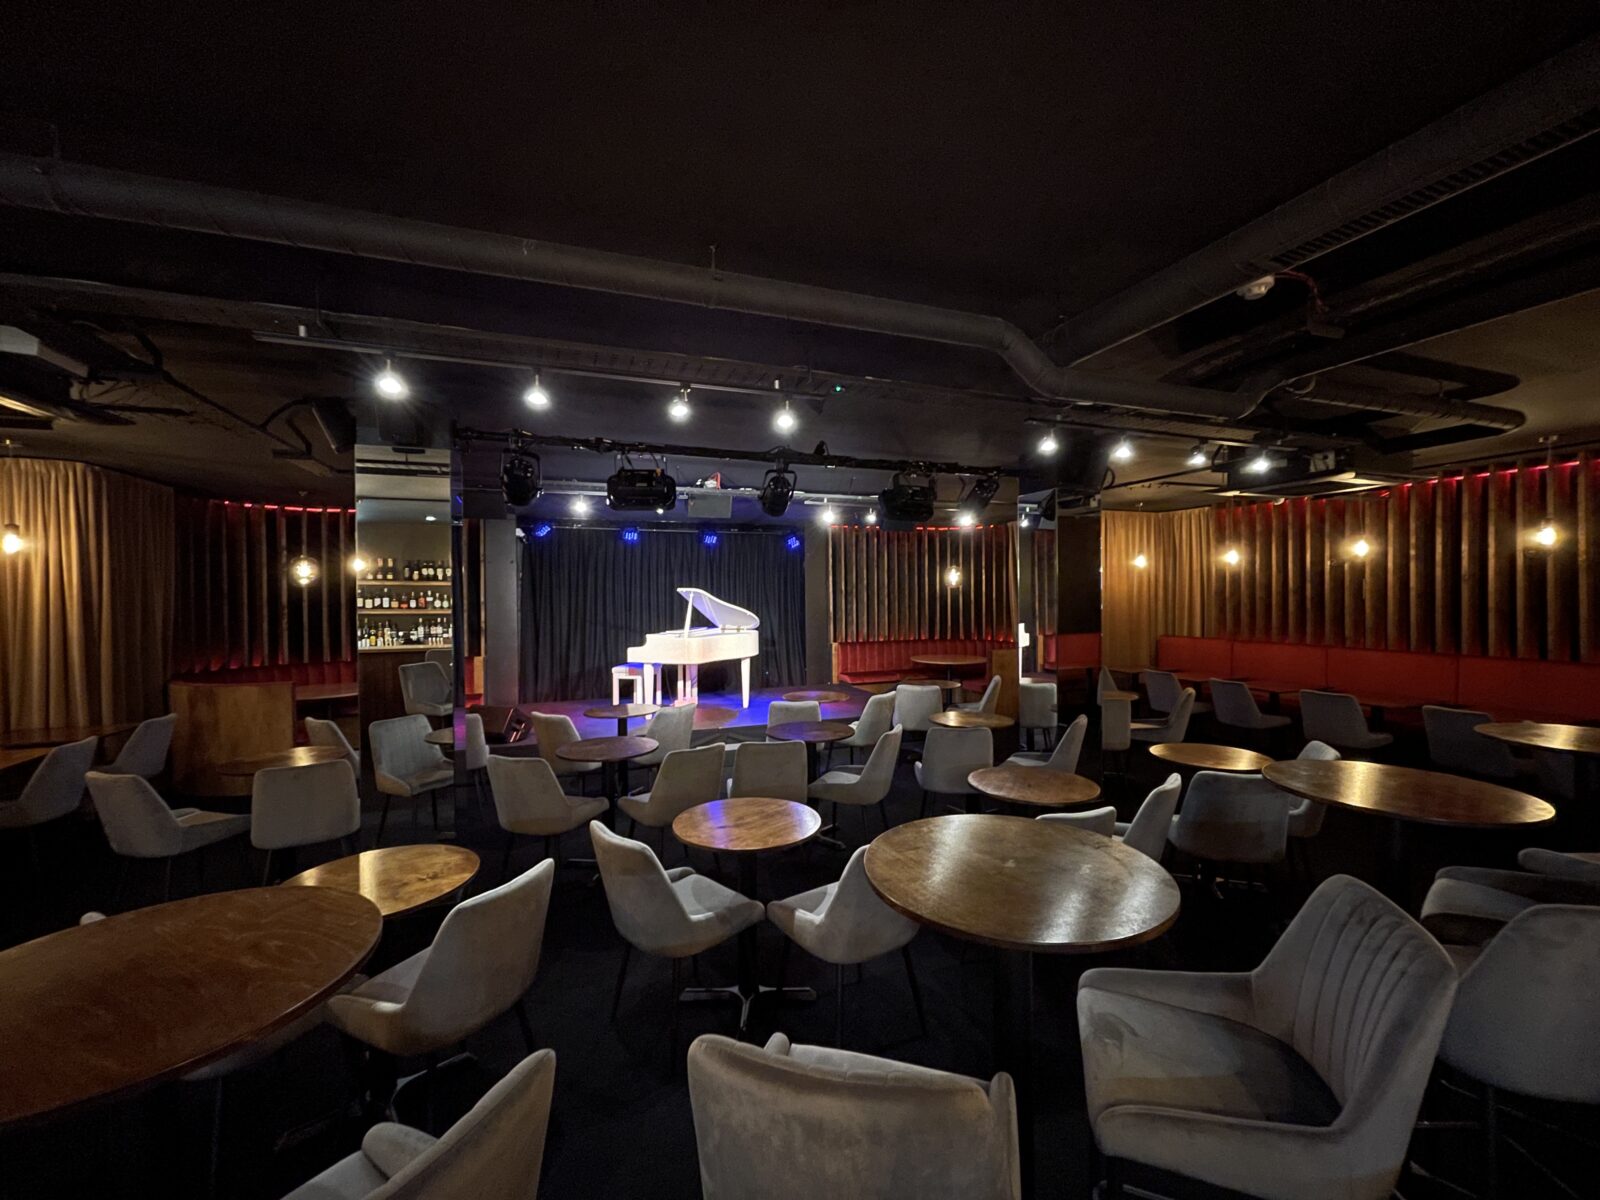 Sonata, a jazz and piano bar in Manchester, has announced its closure. Credit: The Manc Group